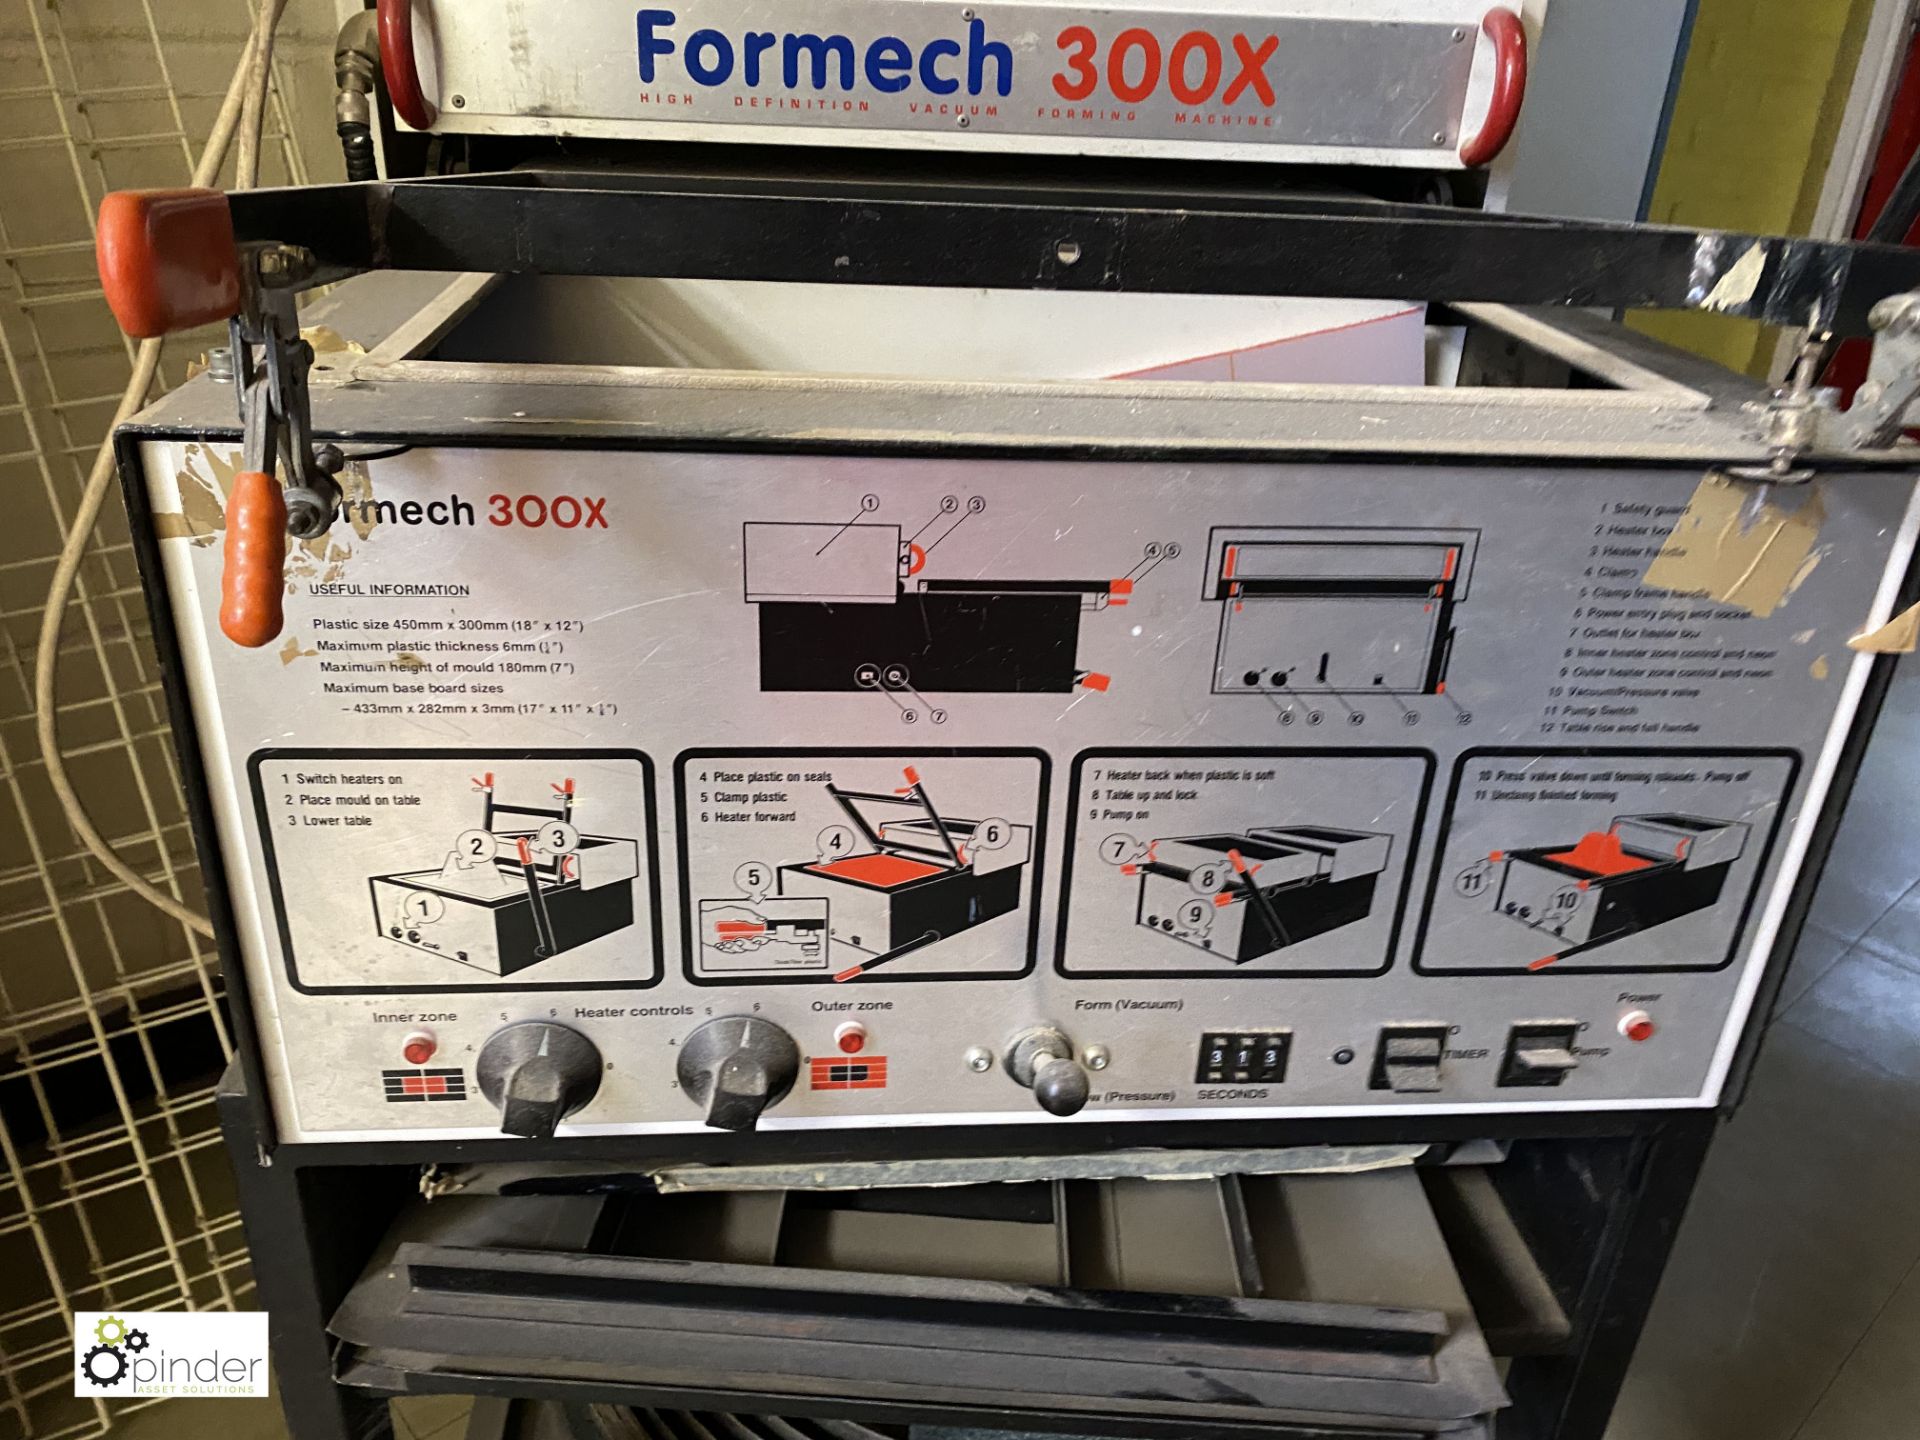 Formech 300X Vacuum Forming Machine, 240volts, serial number 32217, trolley not included (in Tec 1 - Image 3 of 7